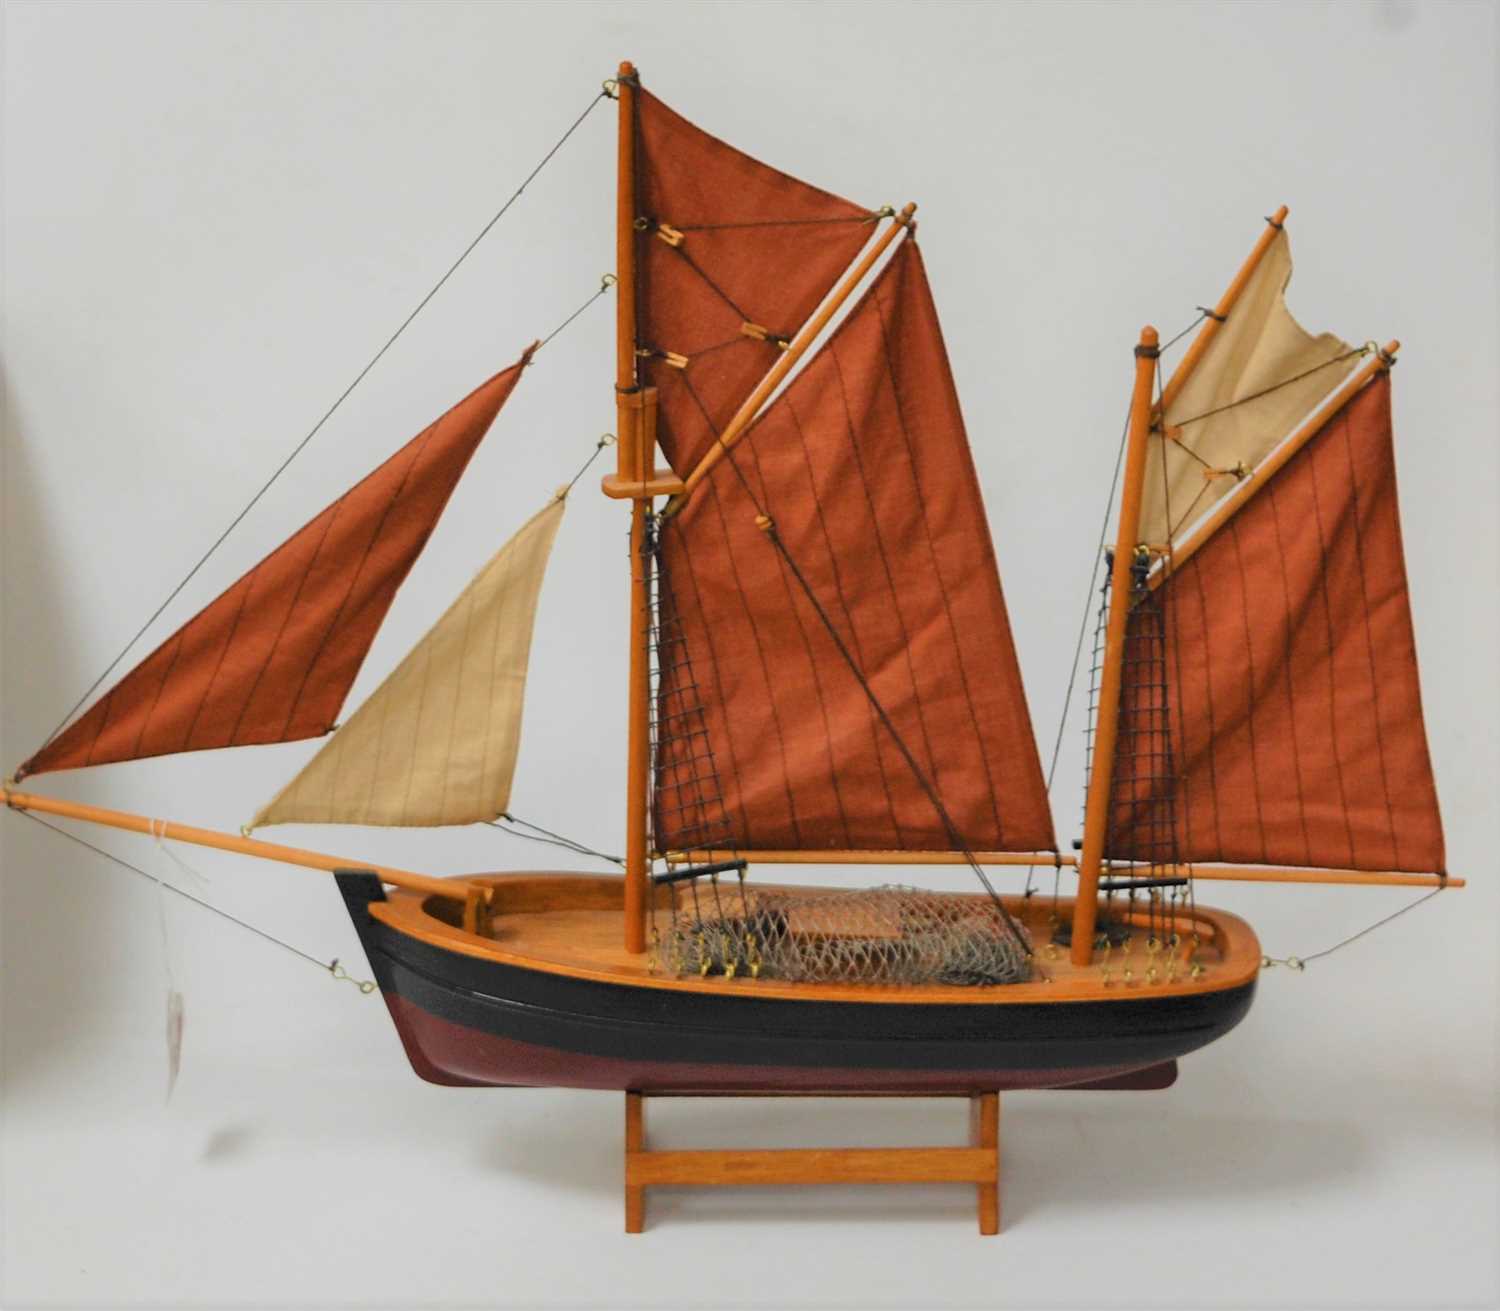 Lot 68 - A scale model of a two-masted boat on stand